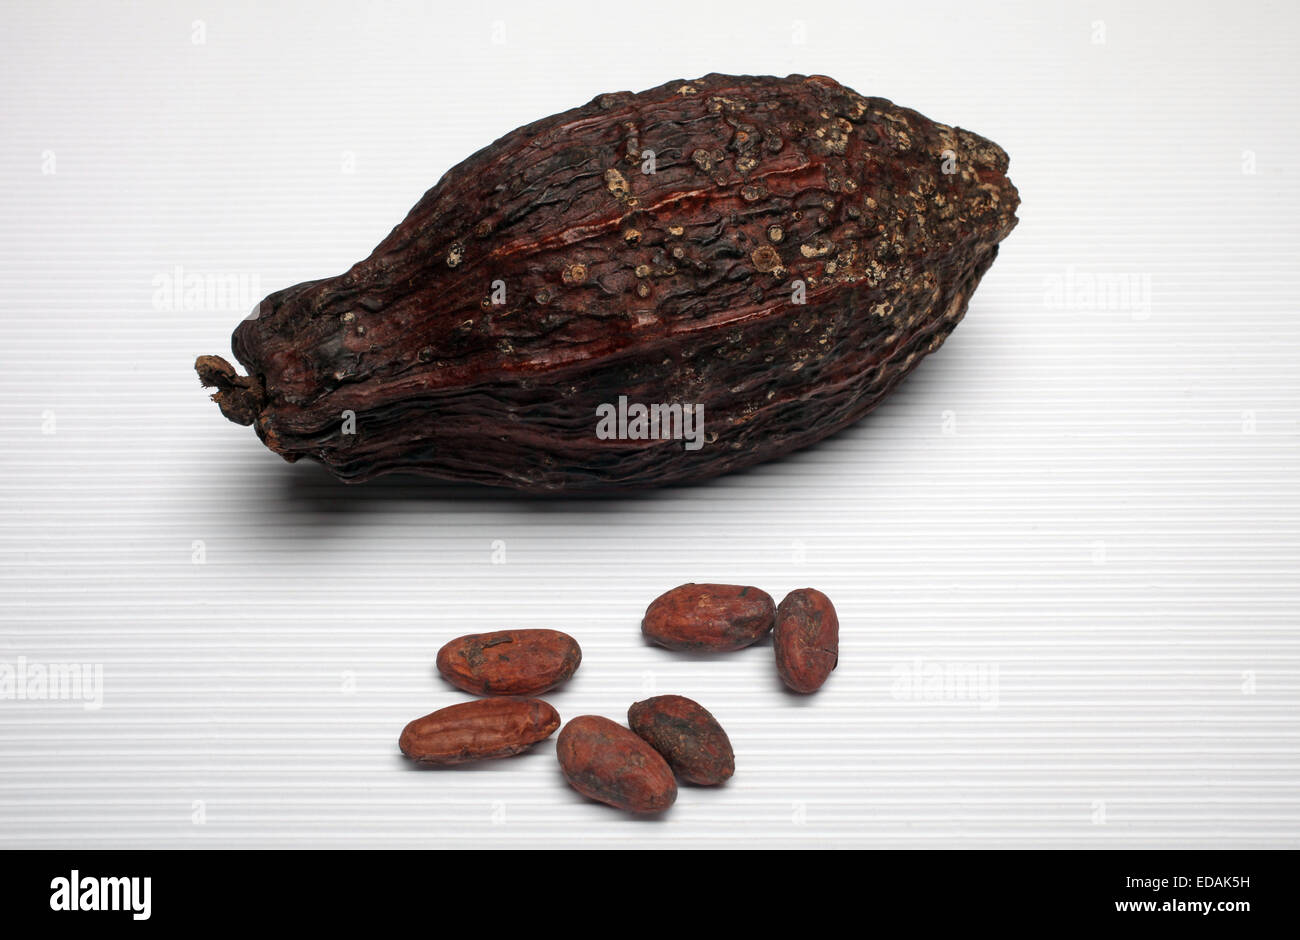 Cocoa pods and beans Stock Photo